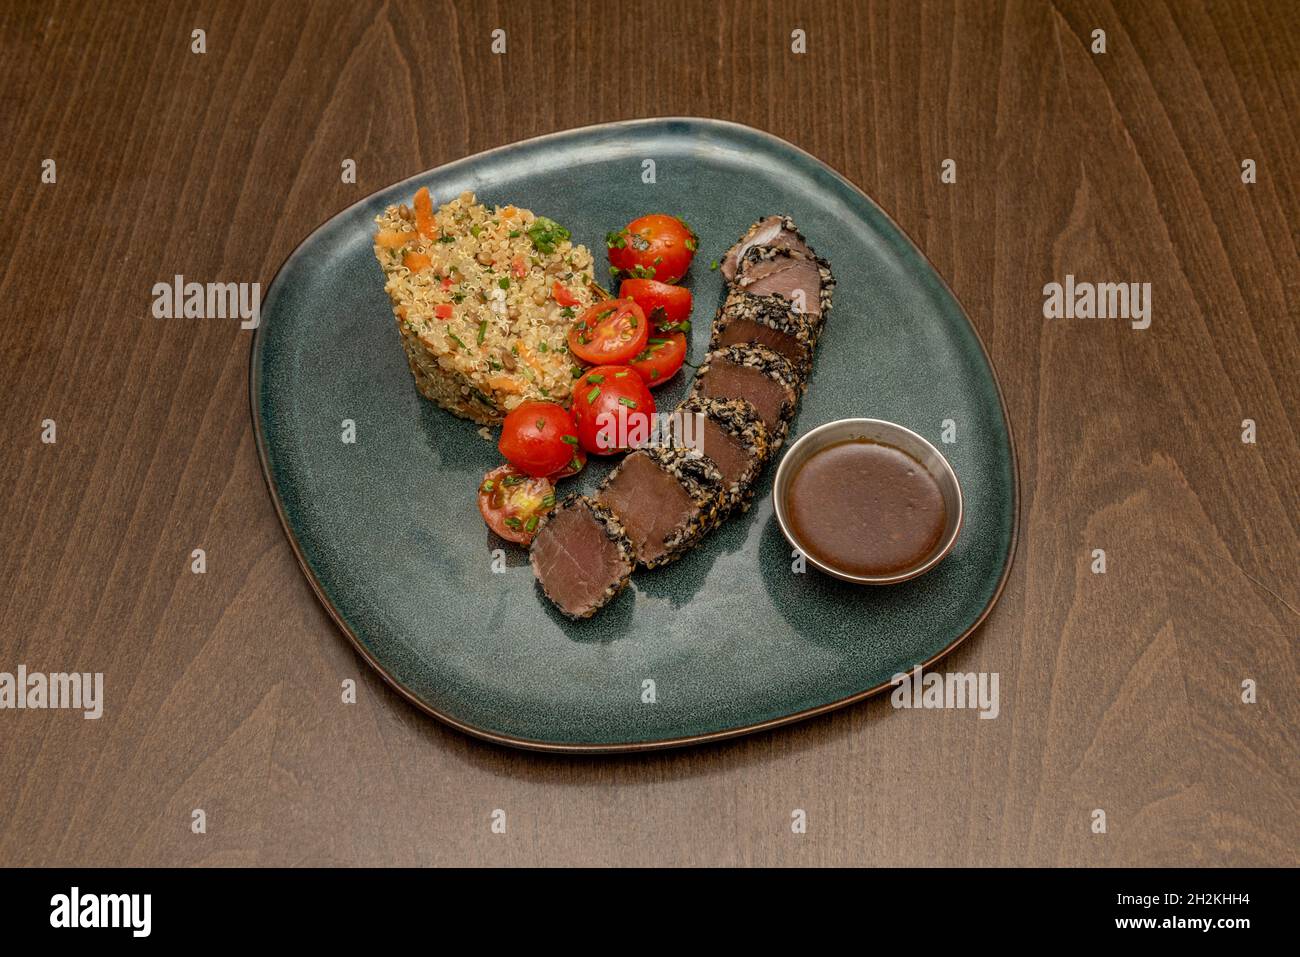 Red tuna tataki recipe accompanied by cherry tomato salad garnished with olive oil and quinoa guranicion with vegetables and sauce on a blue porcelain Stock Photo